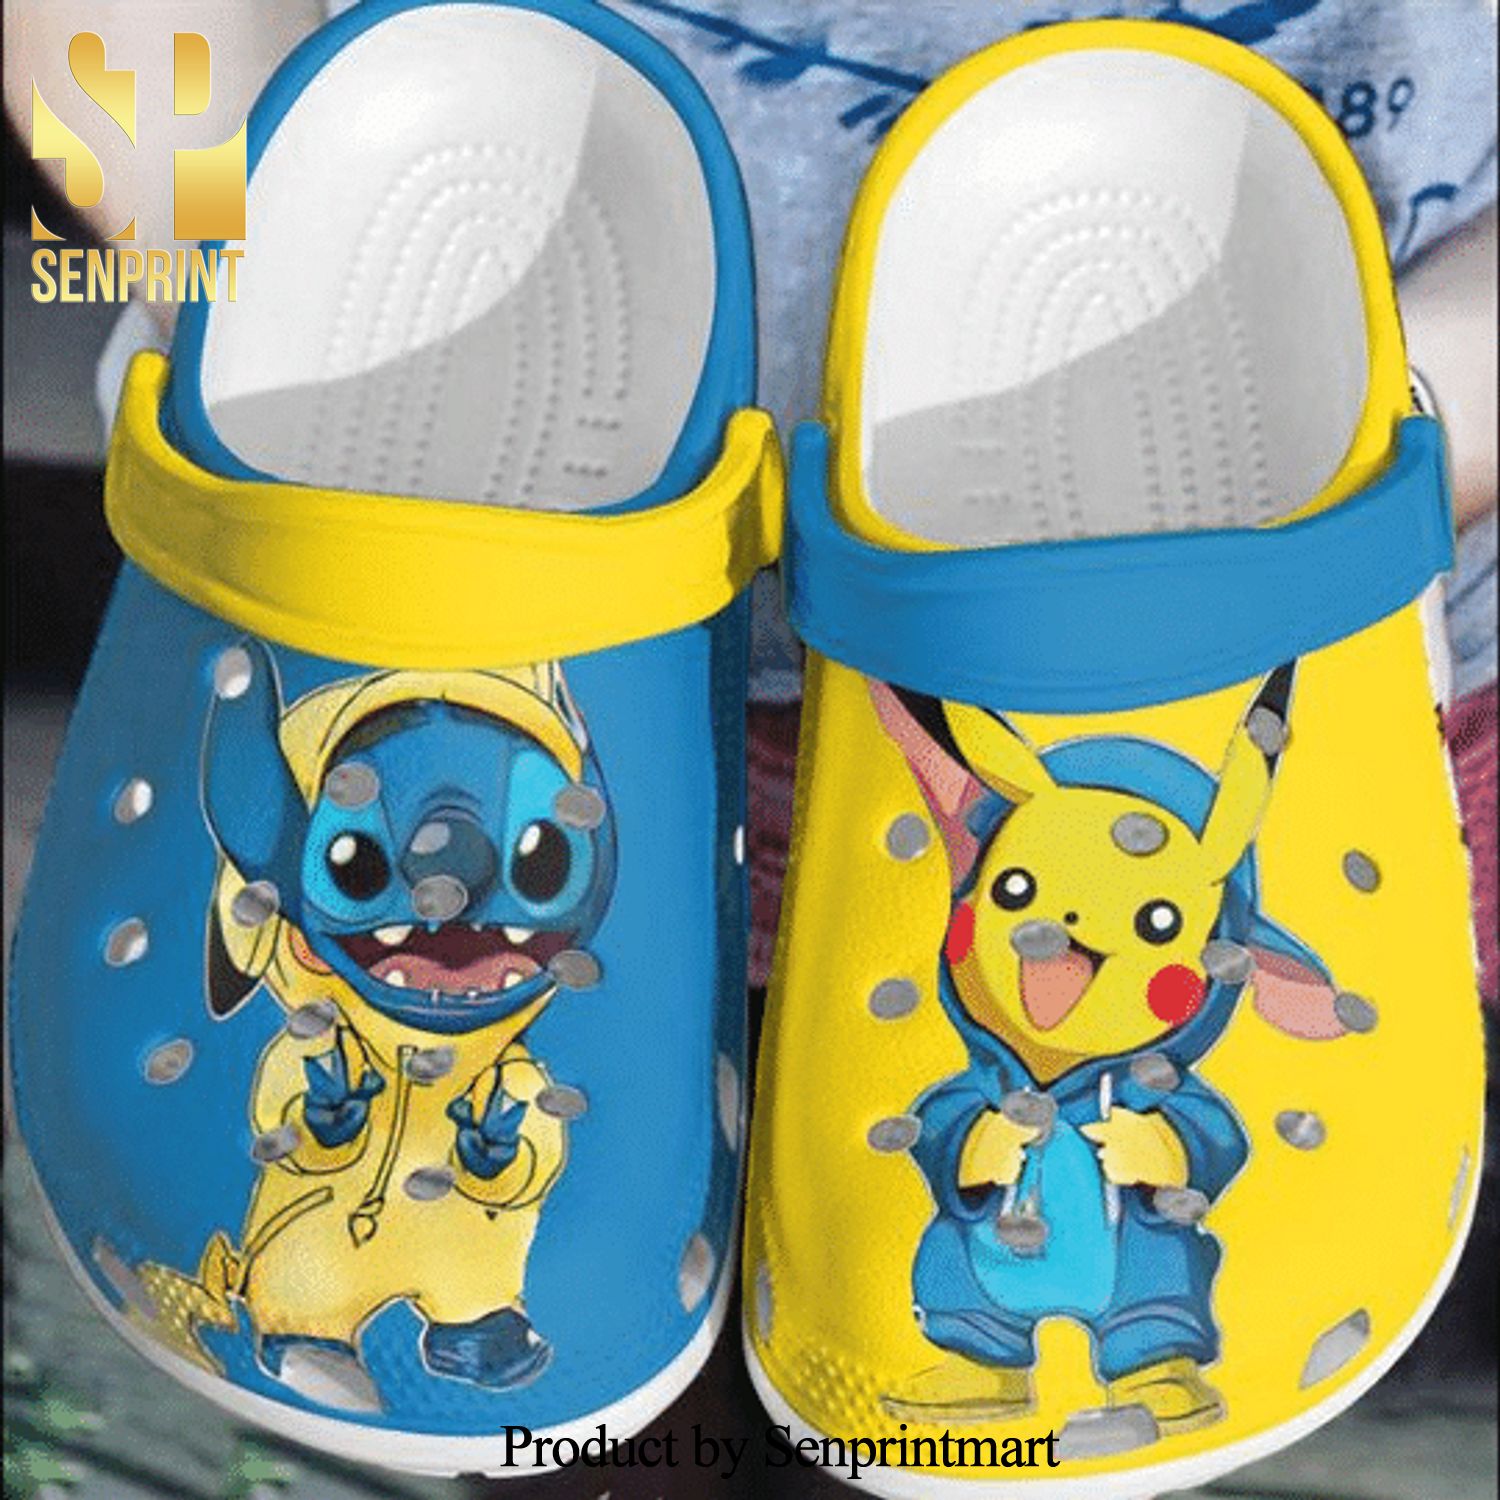 Baby Stitch And Pikachu Classic Water Rubber Crocs Crocband Clog